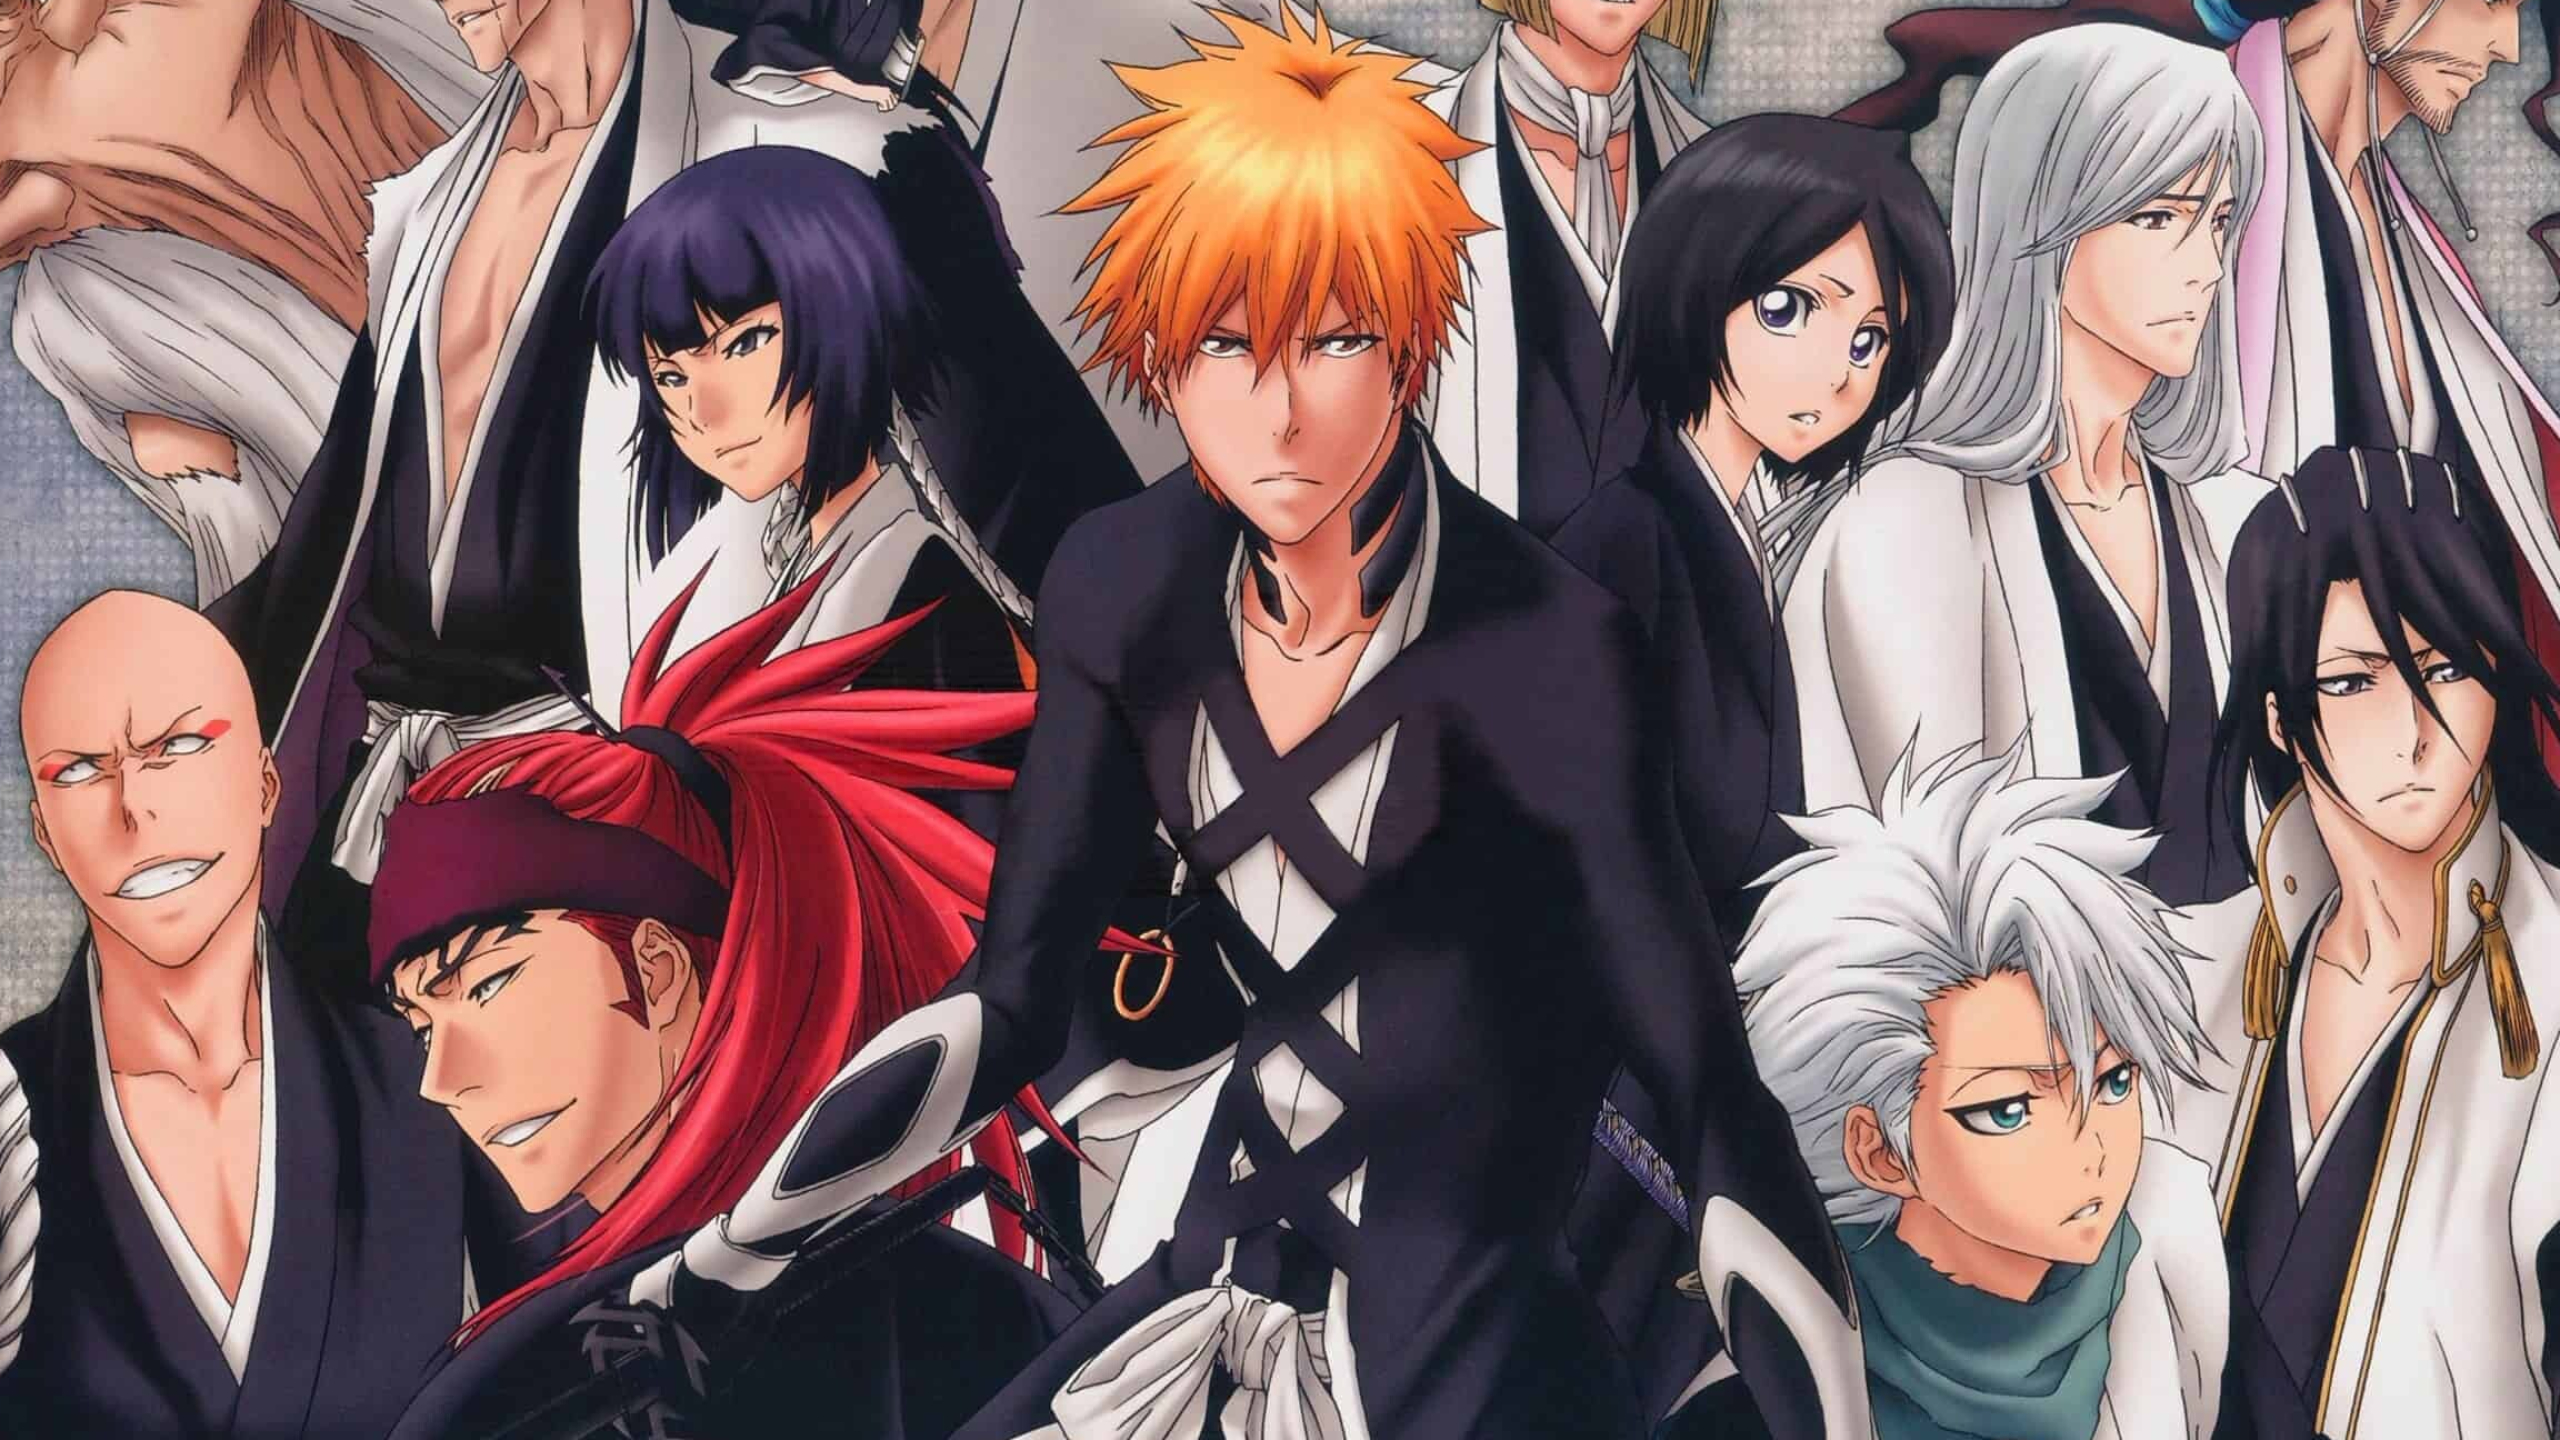 Bleach: Thousand Year Blood War: The series is directed by Tomohisa Taguchi and premiered on TV Tokyo on October 11, 2022. 2560x1440 HD Background.